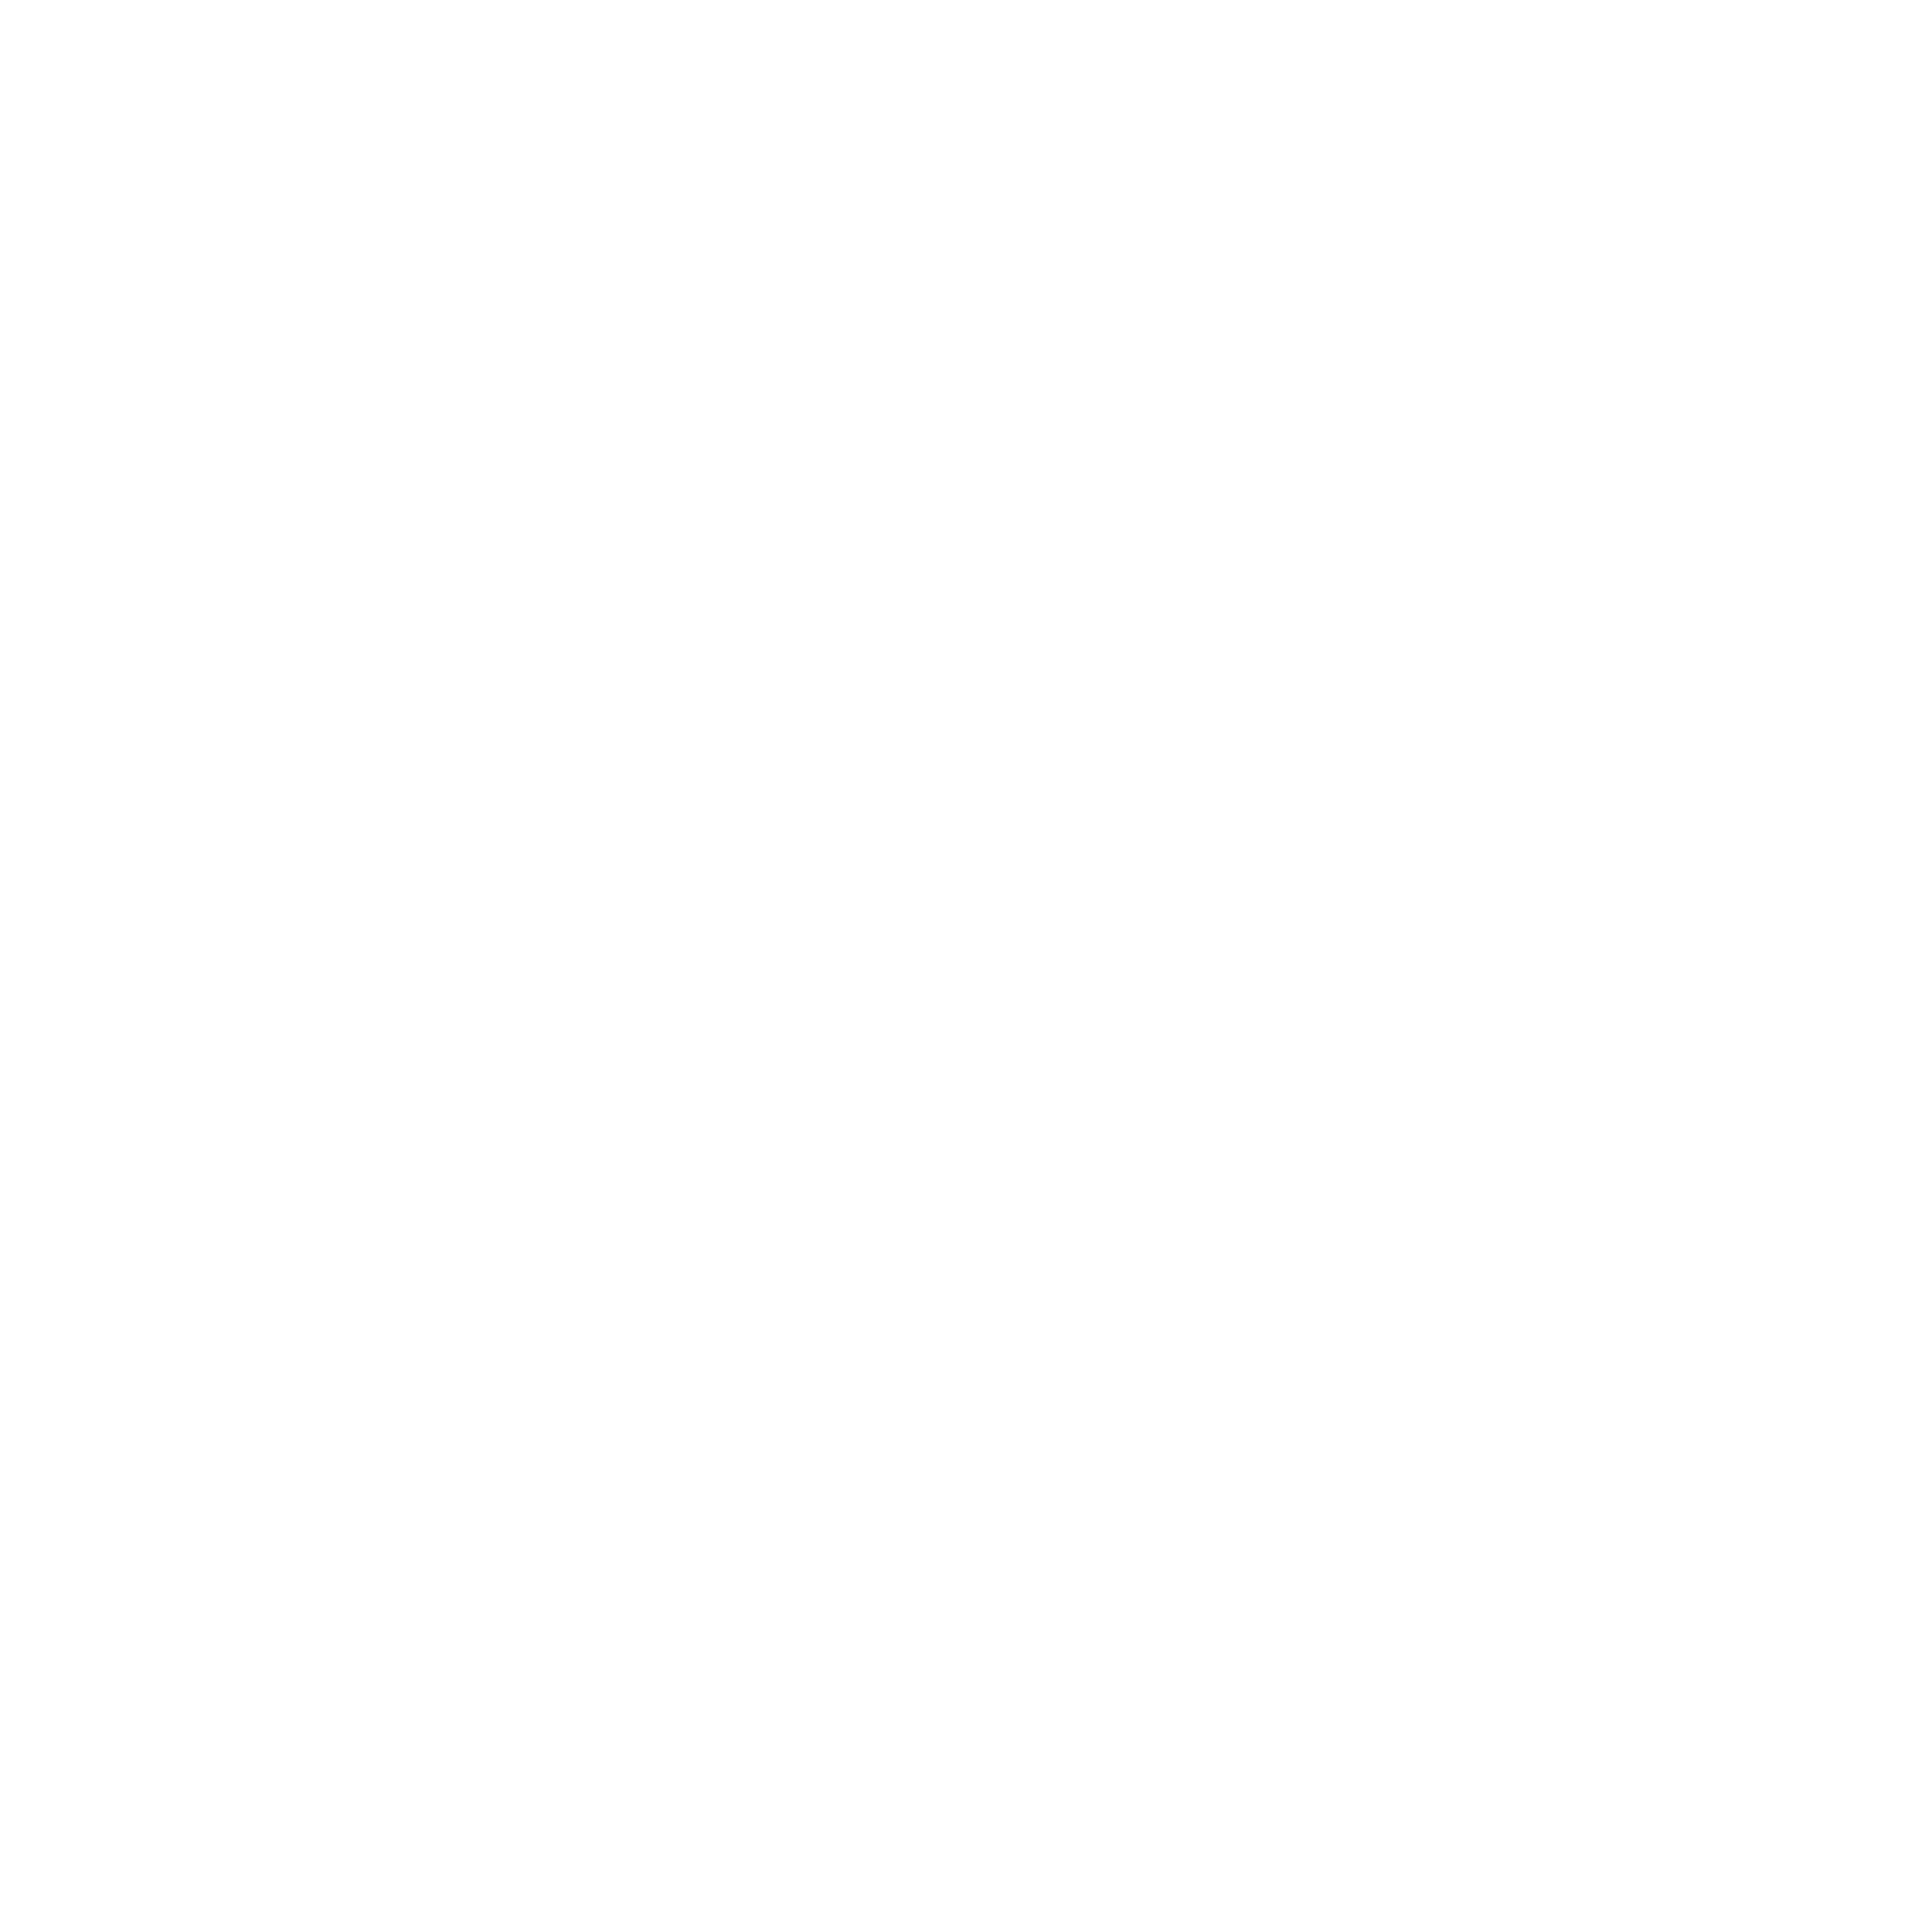 CLT Realty | Charlotte Residential Real Estate